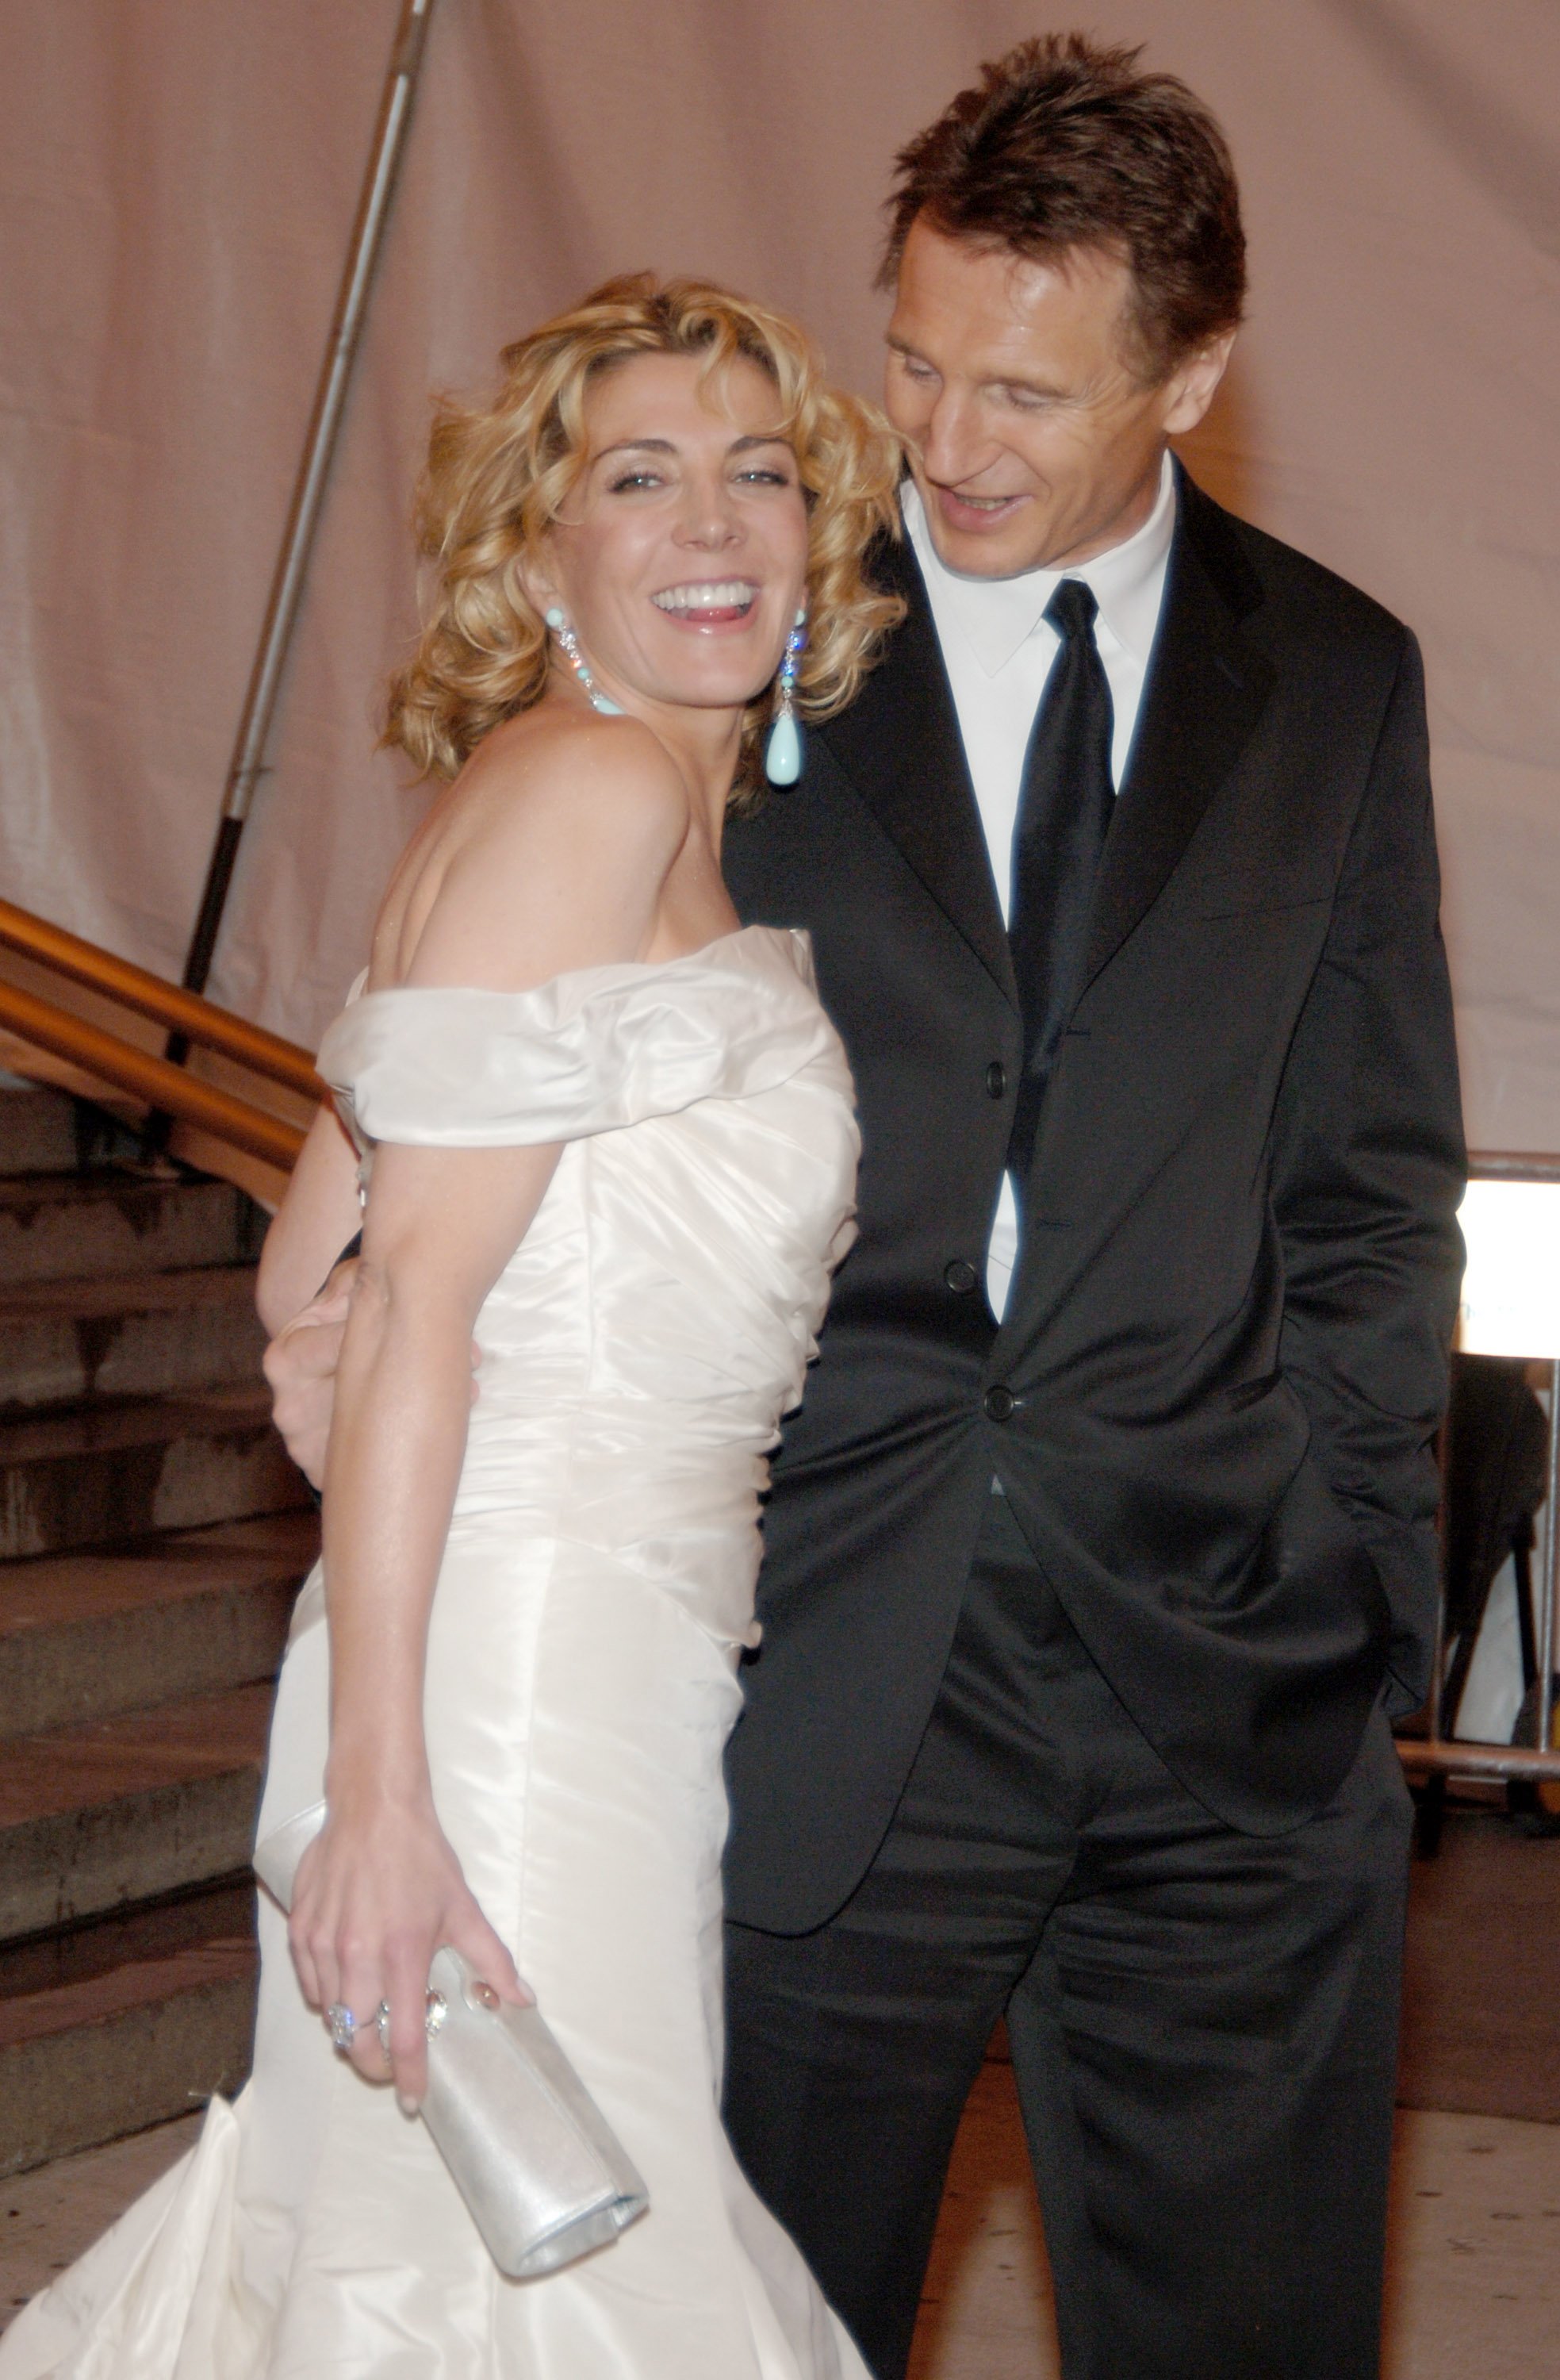 Liam Neeson and Natasha Richardson at the "Chanel" Costume Institute Gala Opening on May 2, 2005 | Source: Getty Images